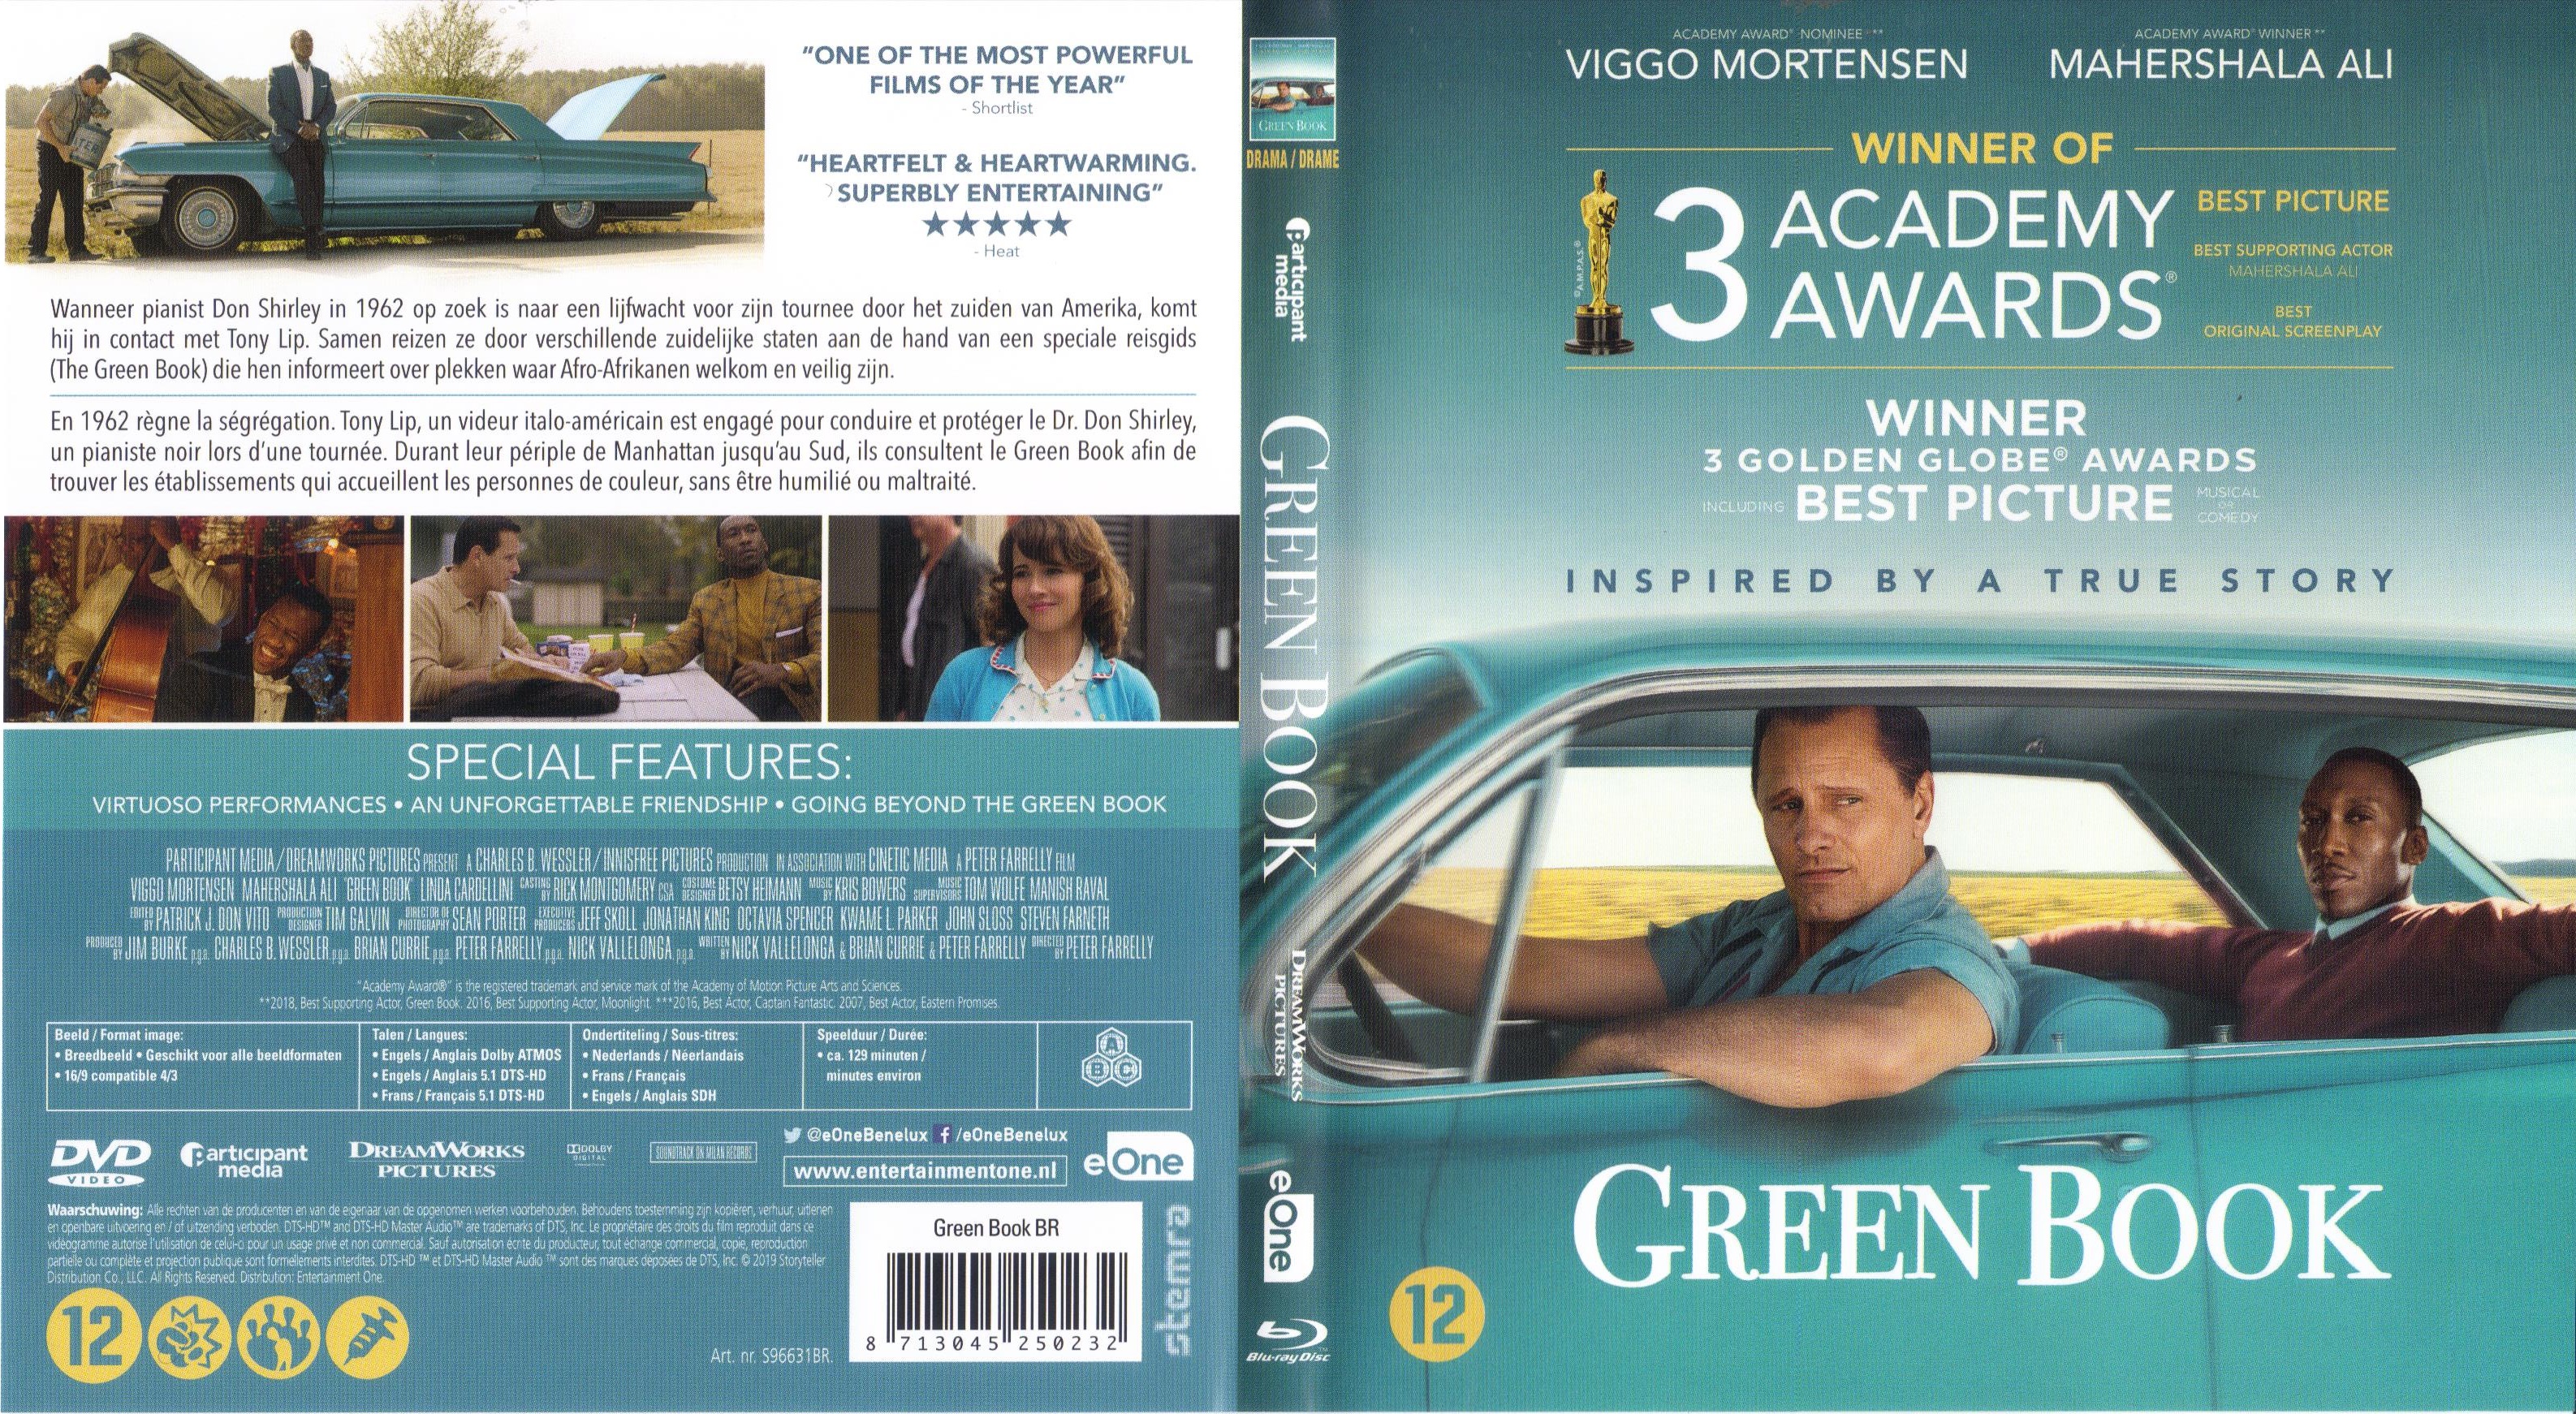 Jaquette DVD Green Book (BLU-RAY)